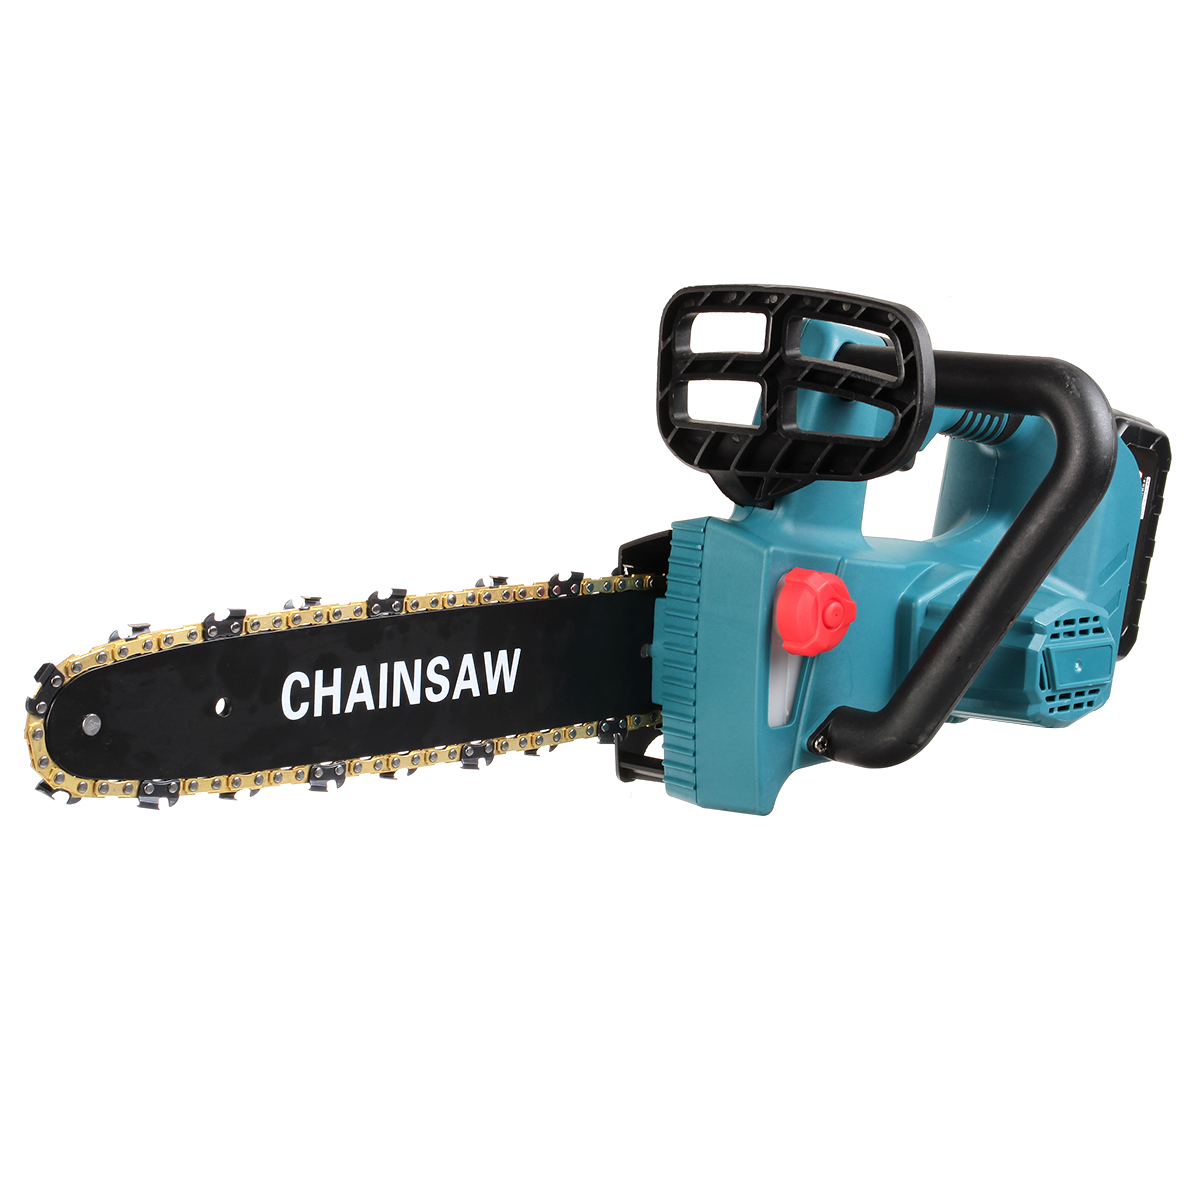 5ms-Portable-Electric-Brushless-Saw-Pruning-Chain-Saw-Rechargeable-Woodworking-Power-Tools-Wood-Cutt-1909228-12